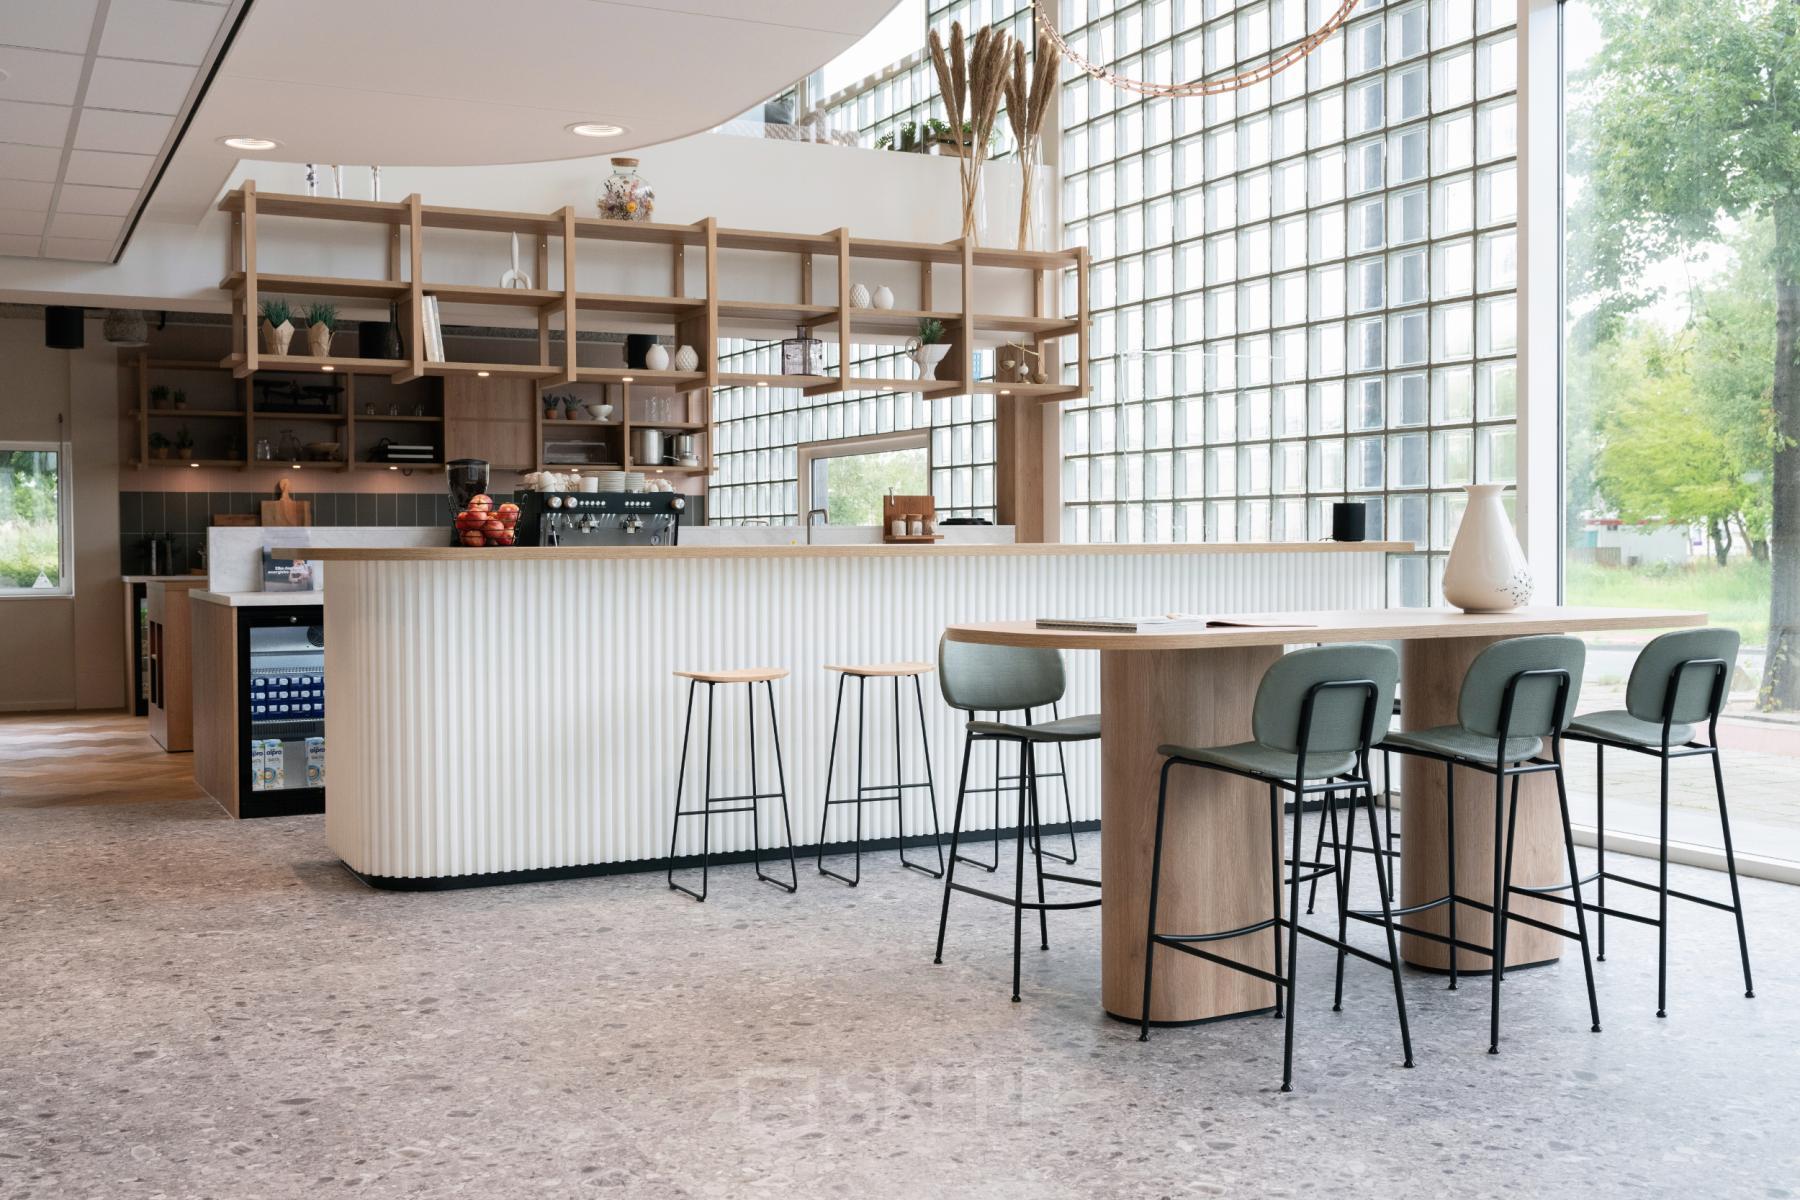 Modern office space rental at Overschiestraat 65, Amsterdam Nieuw-West, featuring a stylish pantry with seating area.